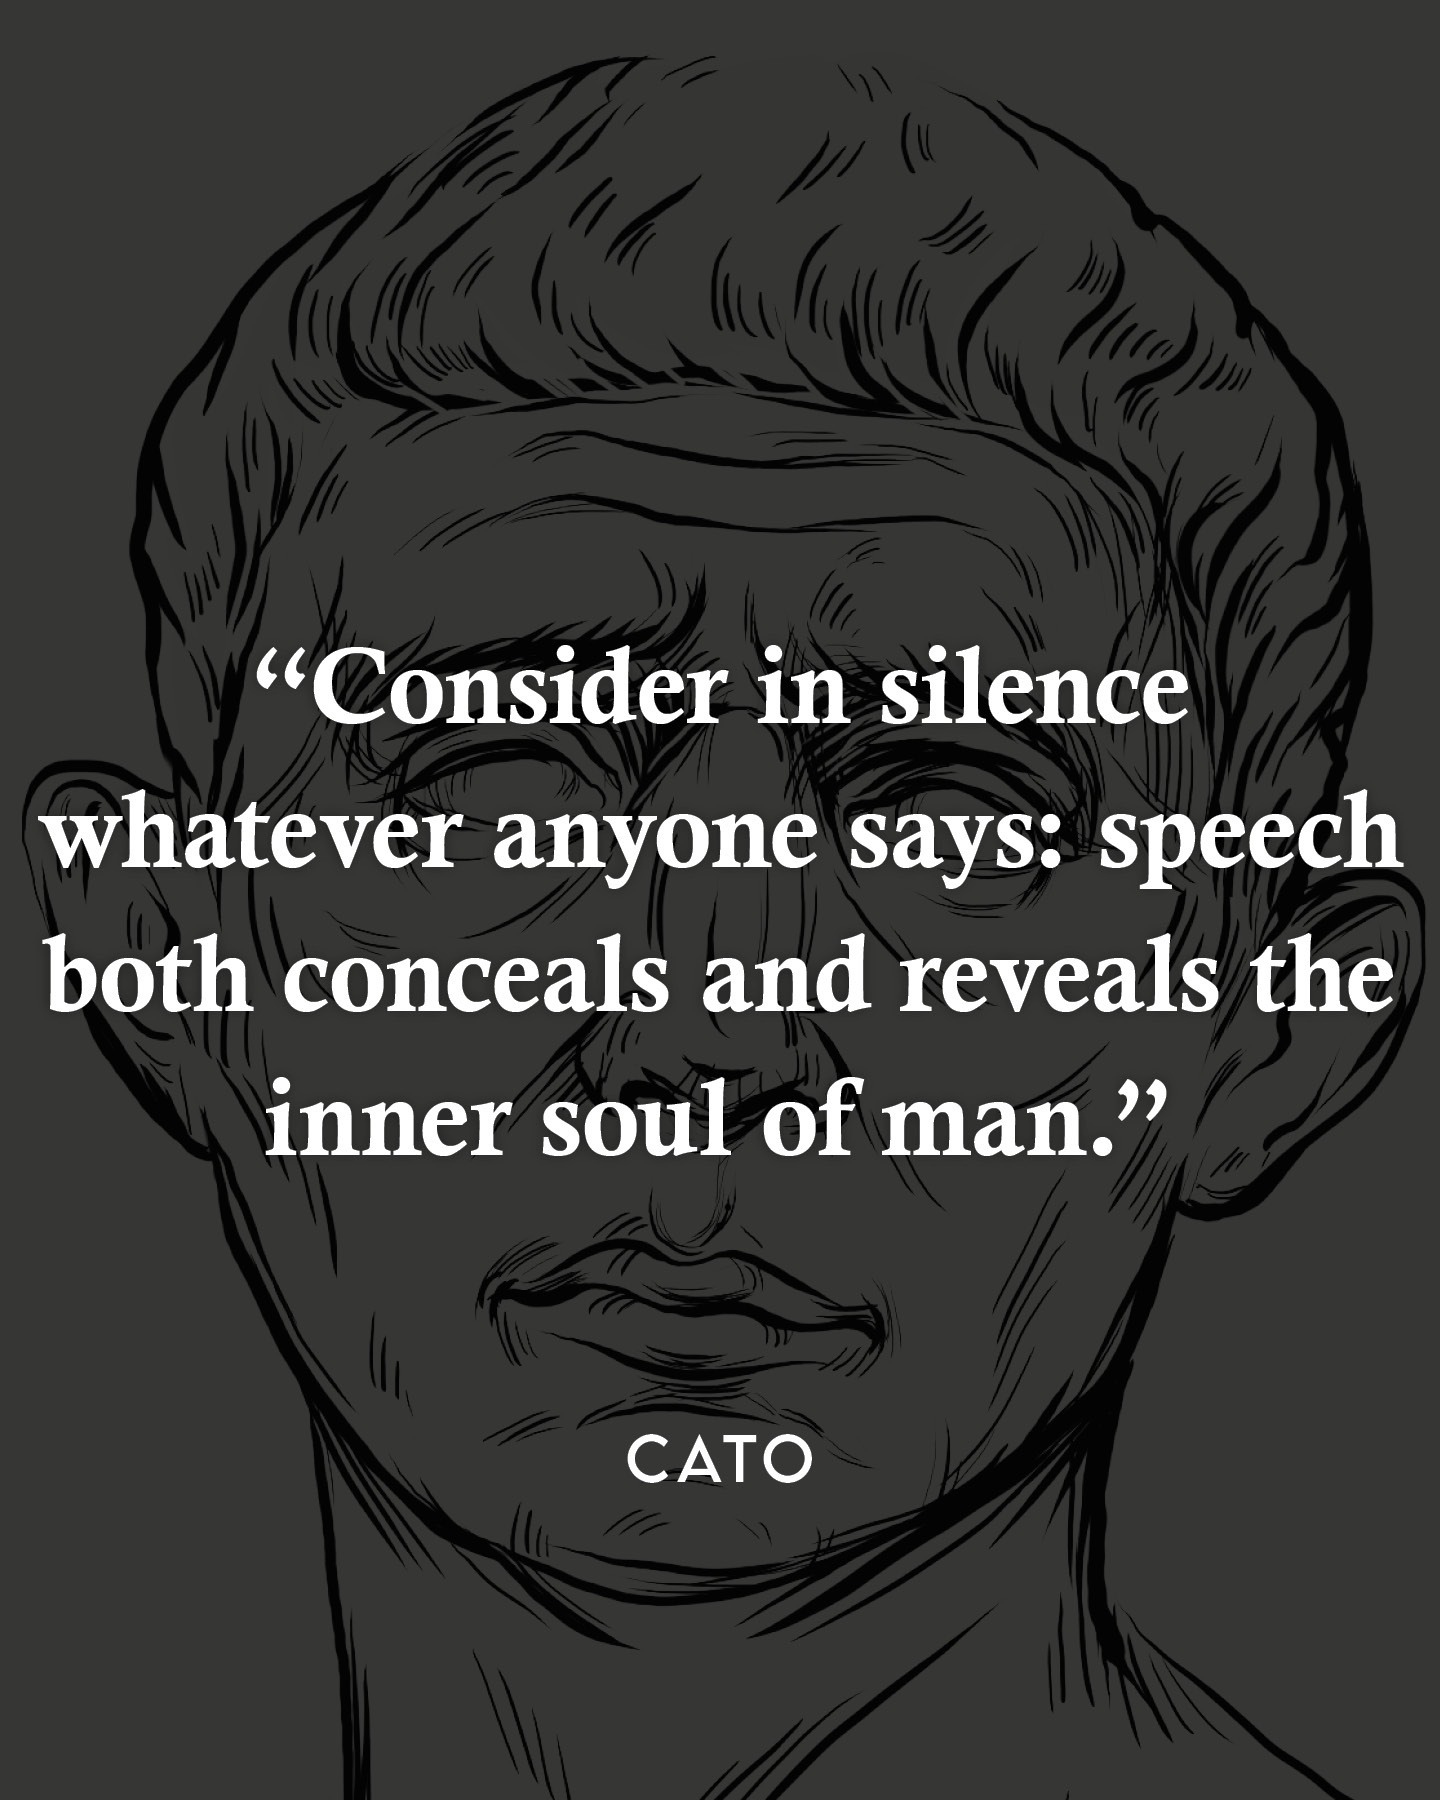 Consider in silence whatever any one says: speech both conceals and reveals the inner soul of man.